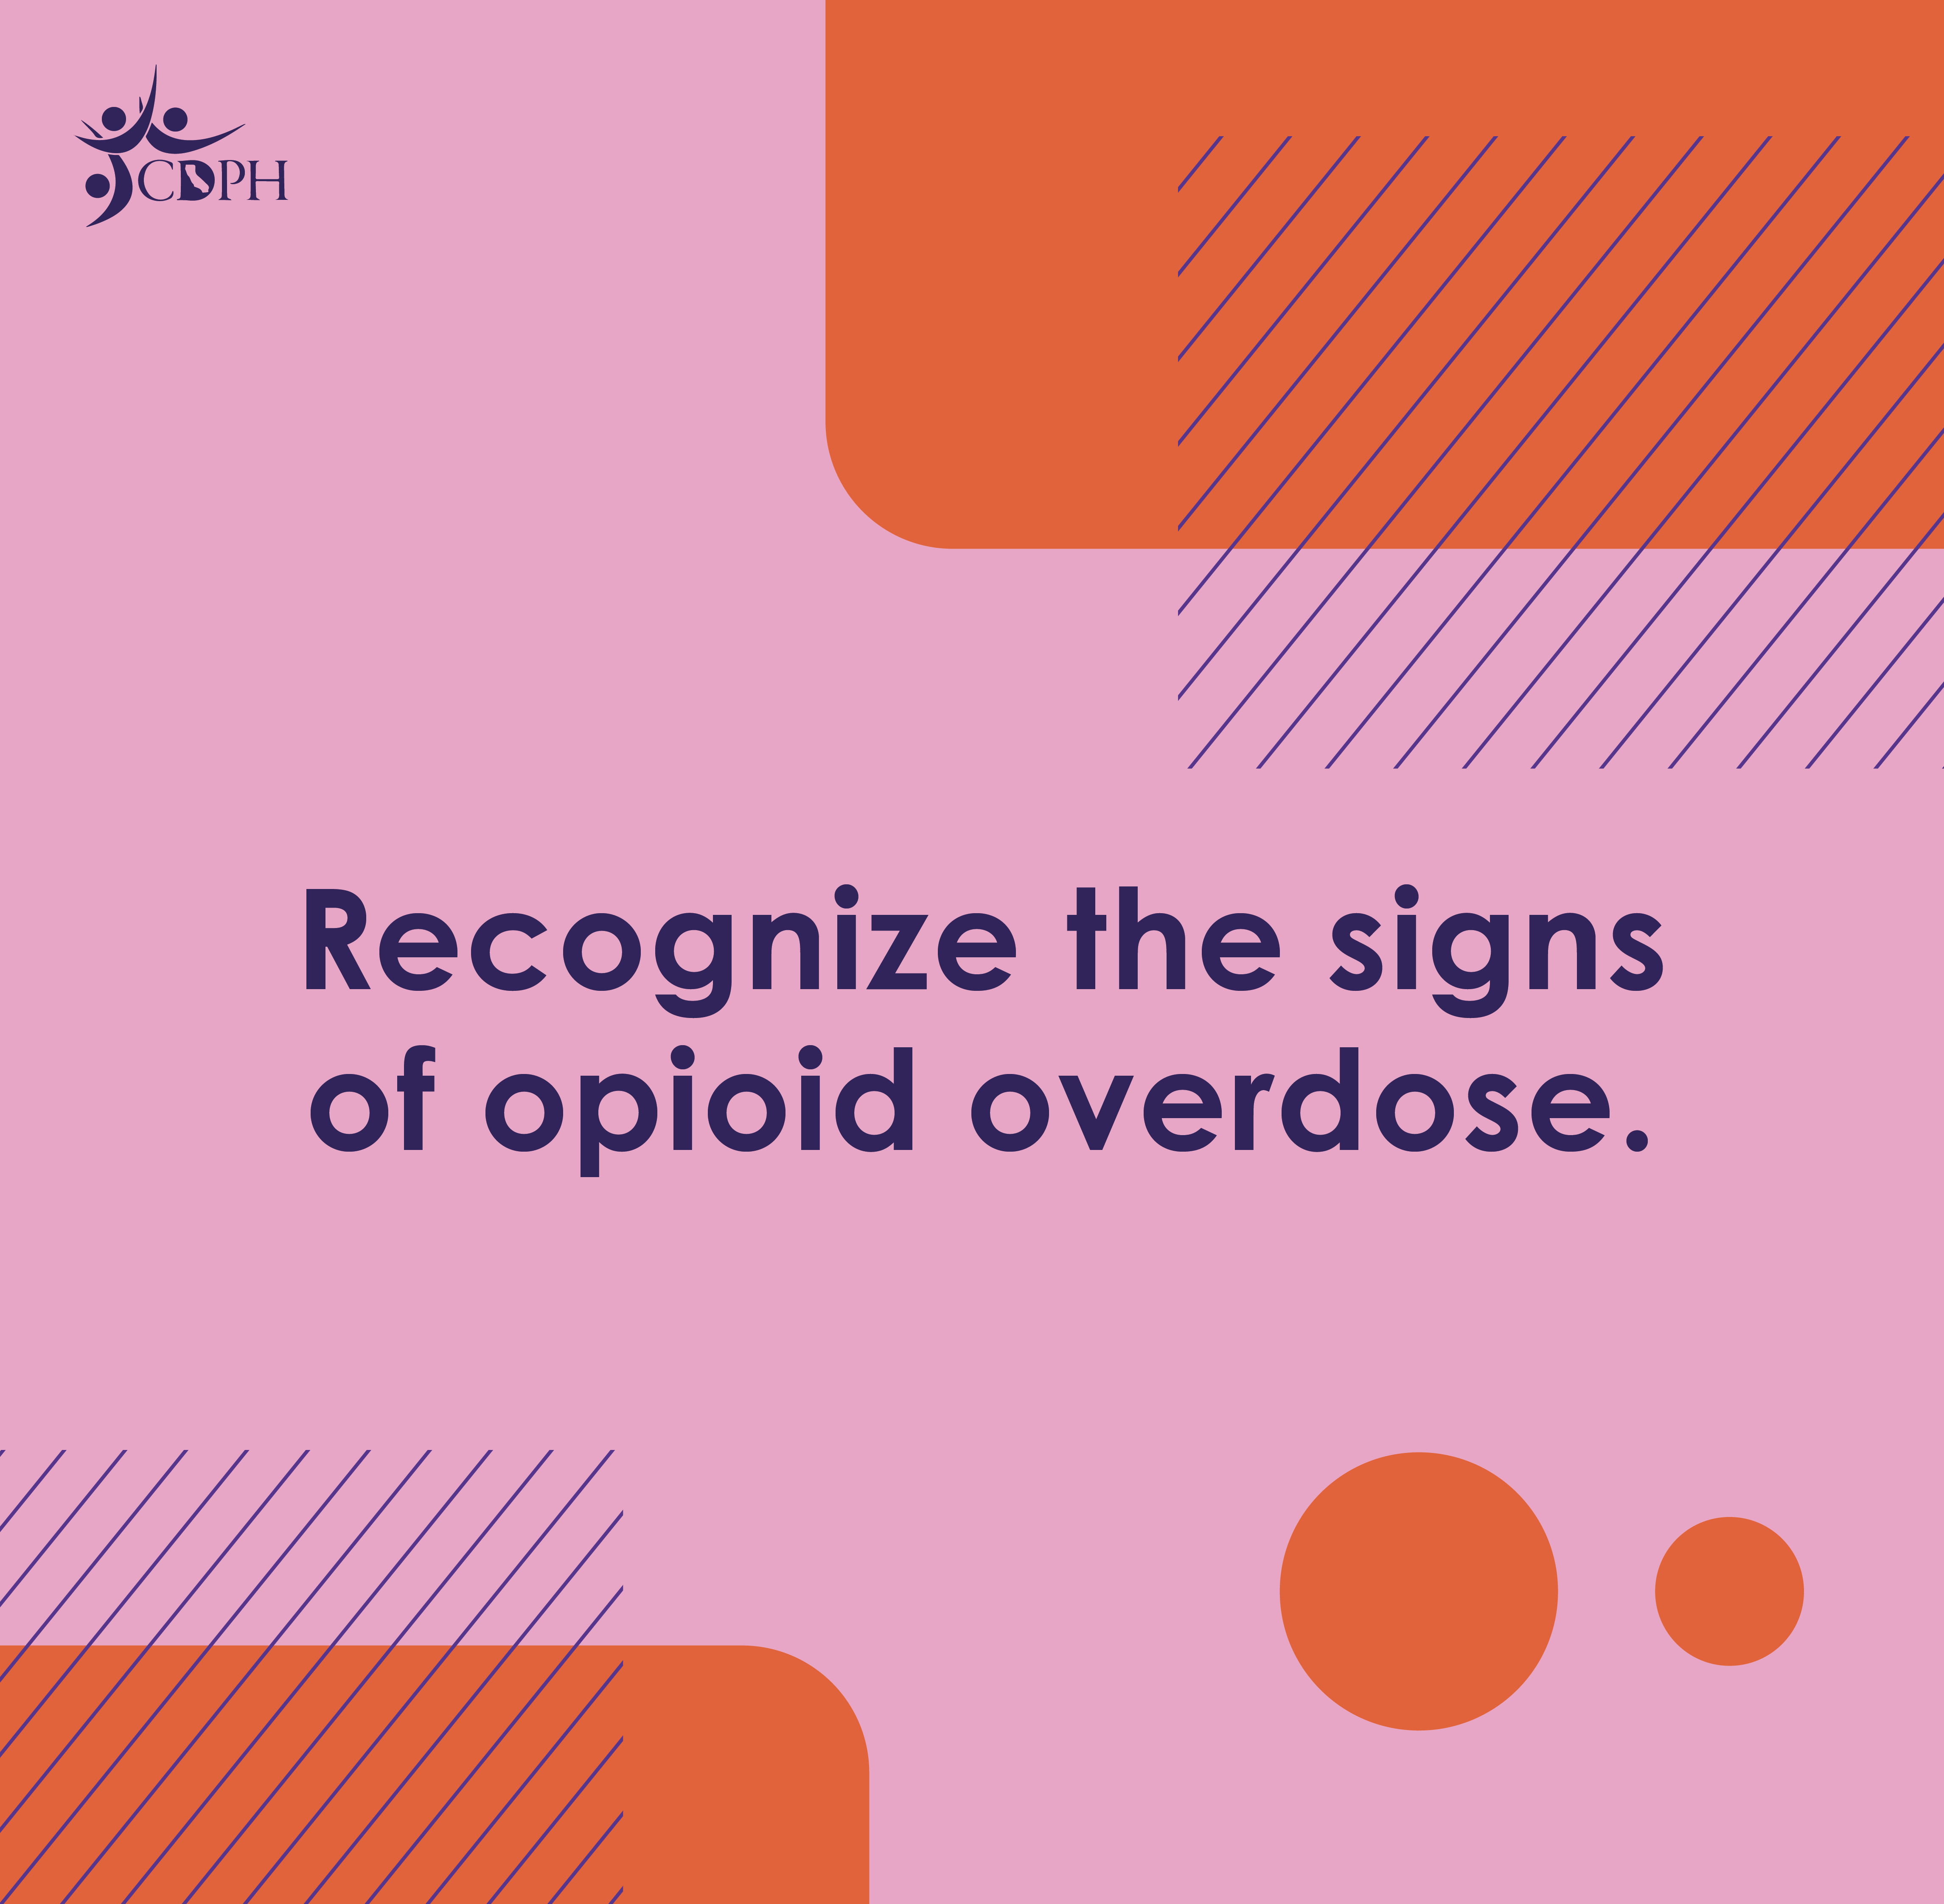 Recognize the signs of opioid overdose.